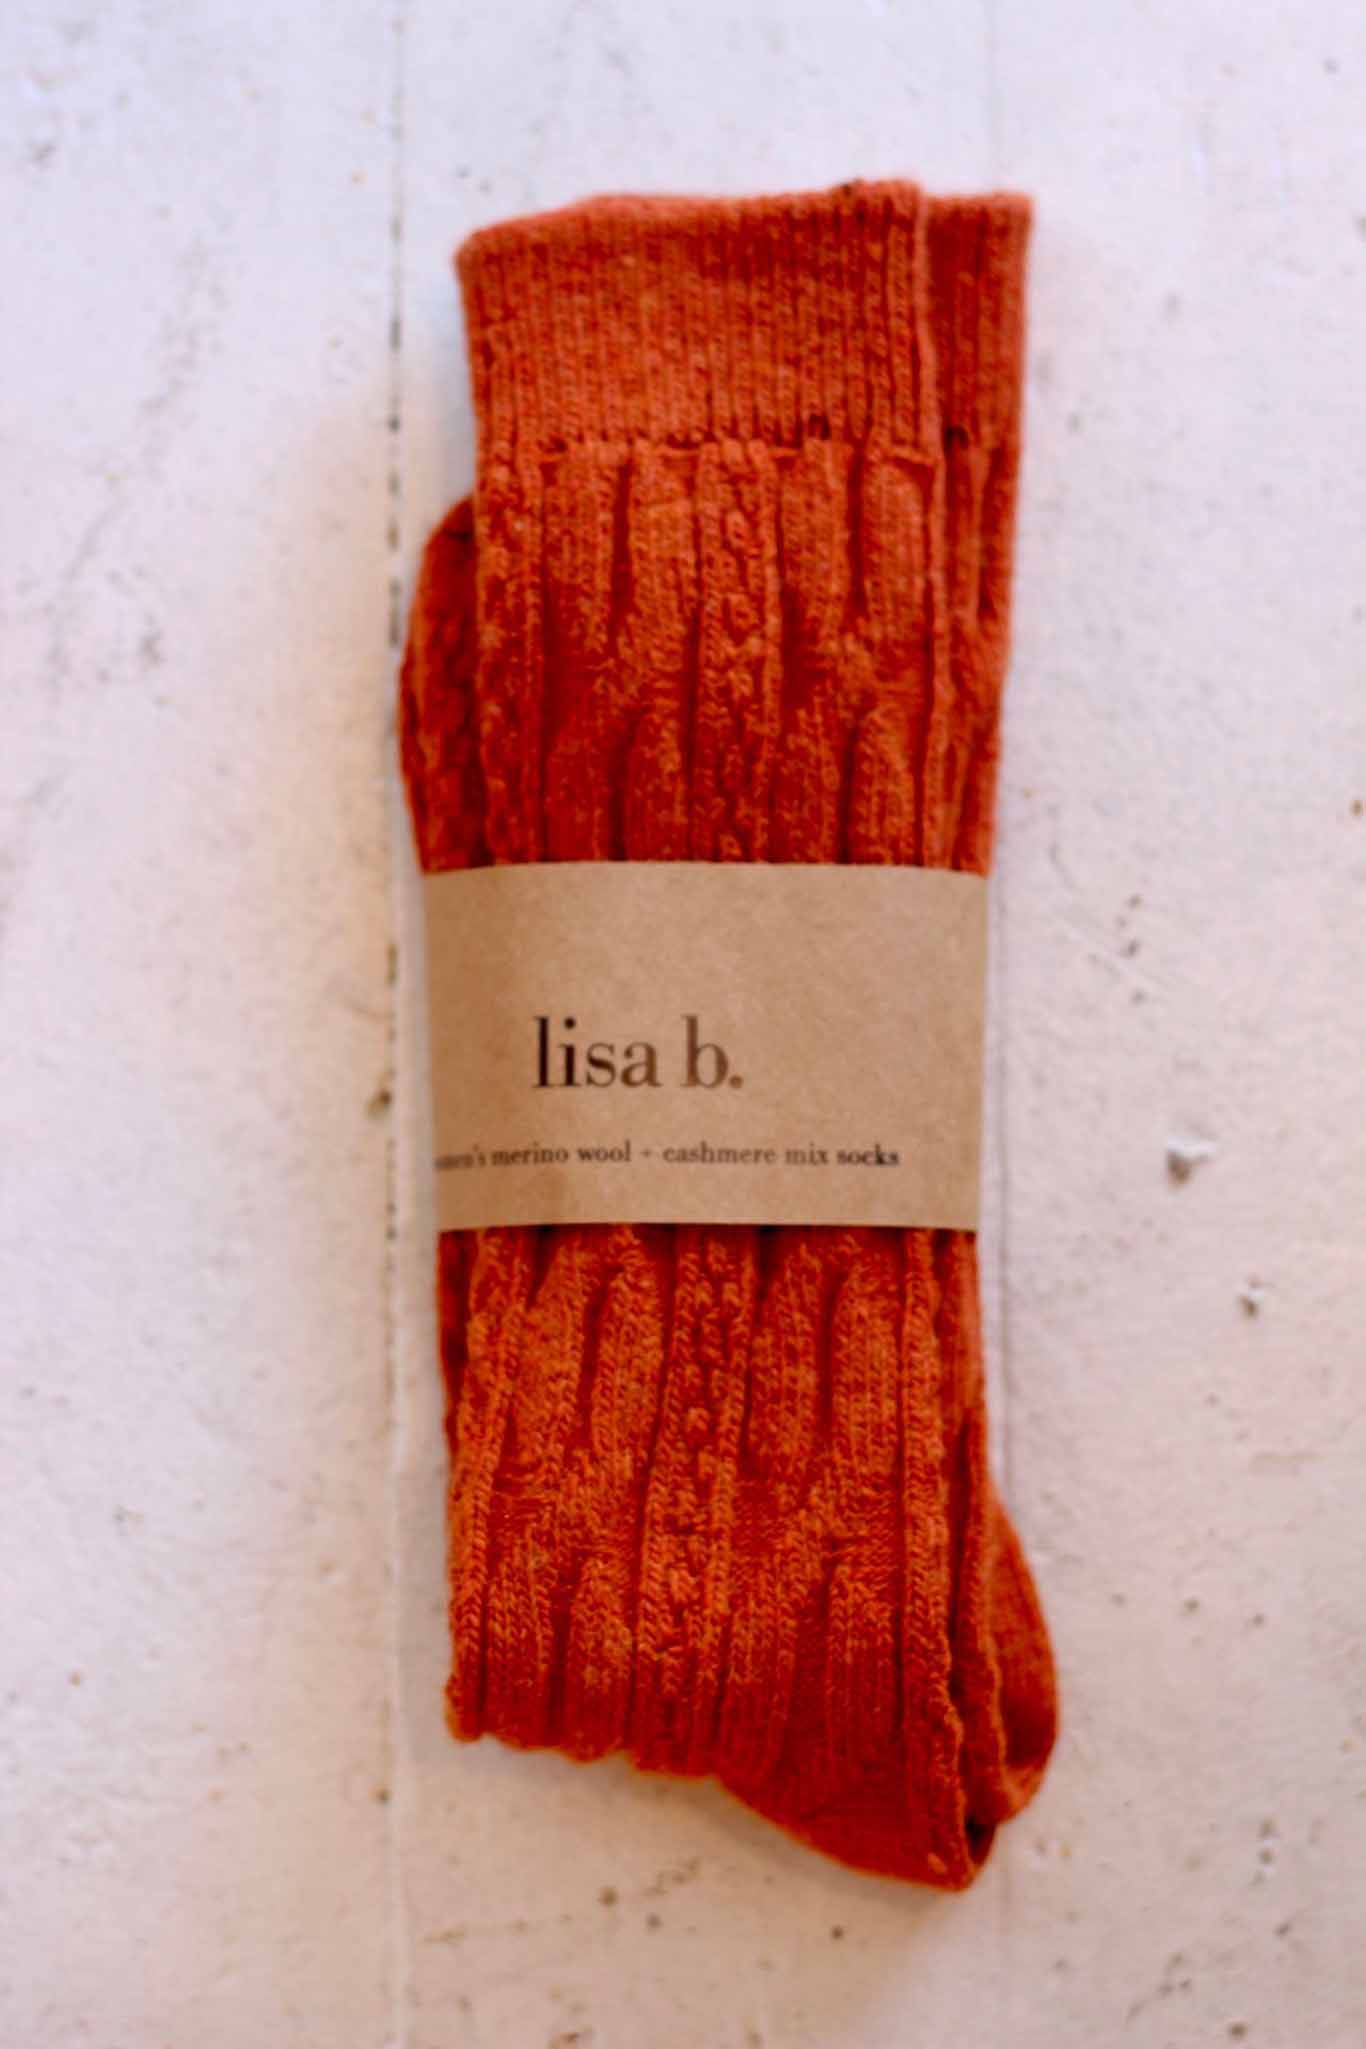 lisa b. Wool Cashmere Cable Crew - Pumpkin